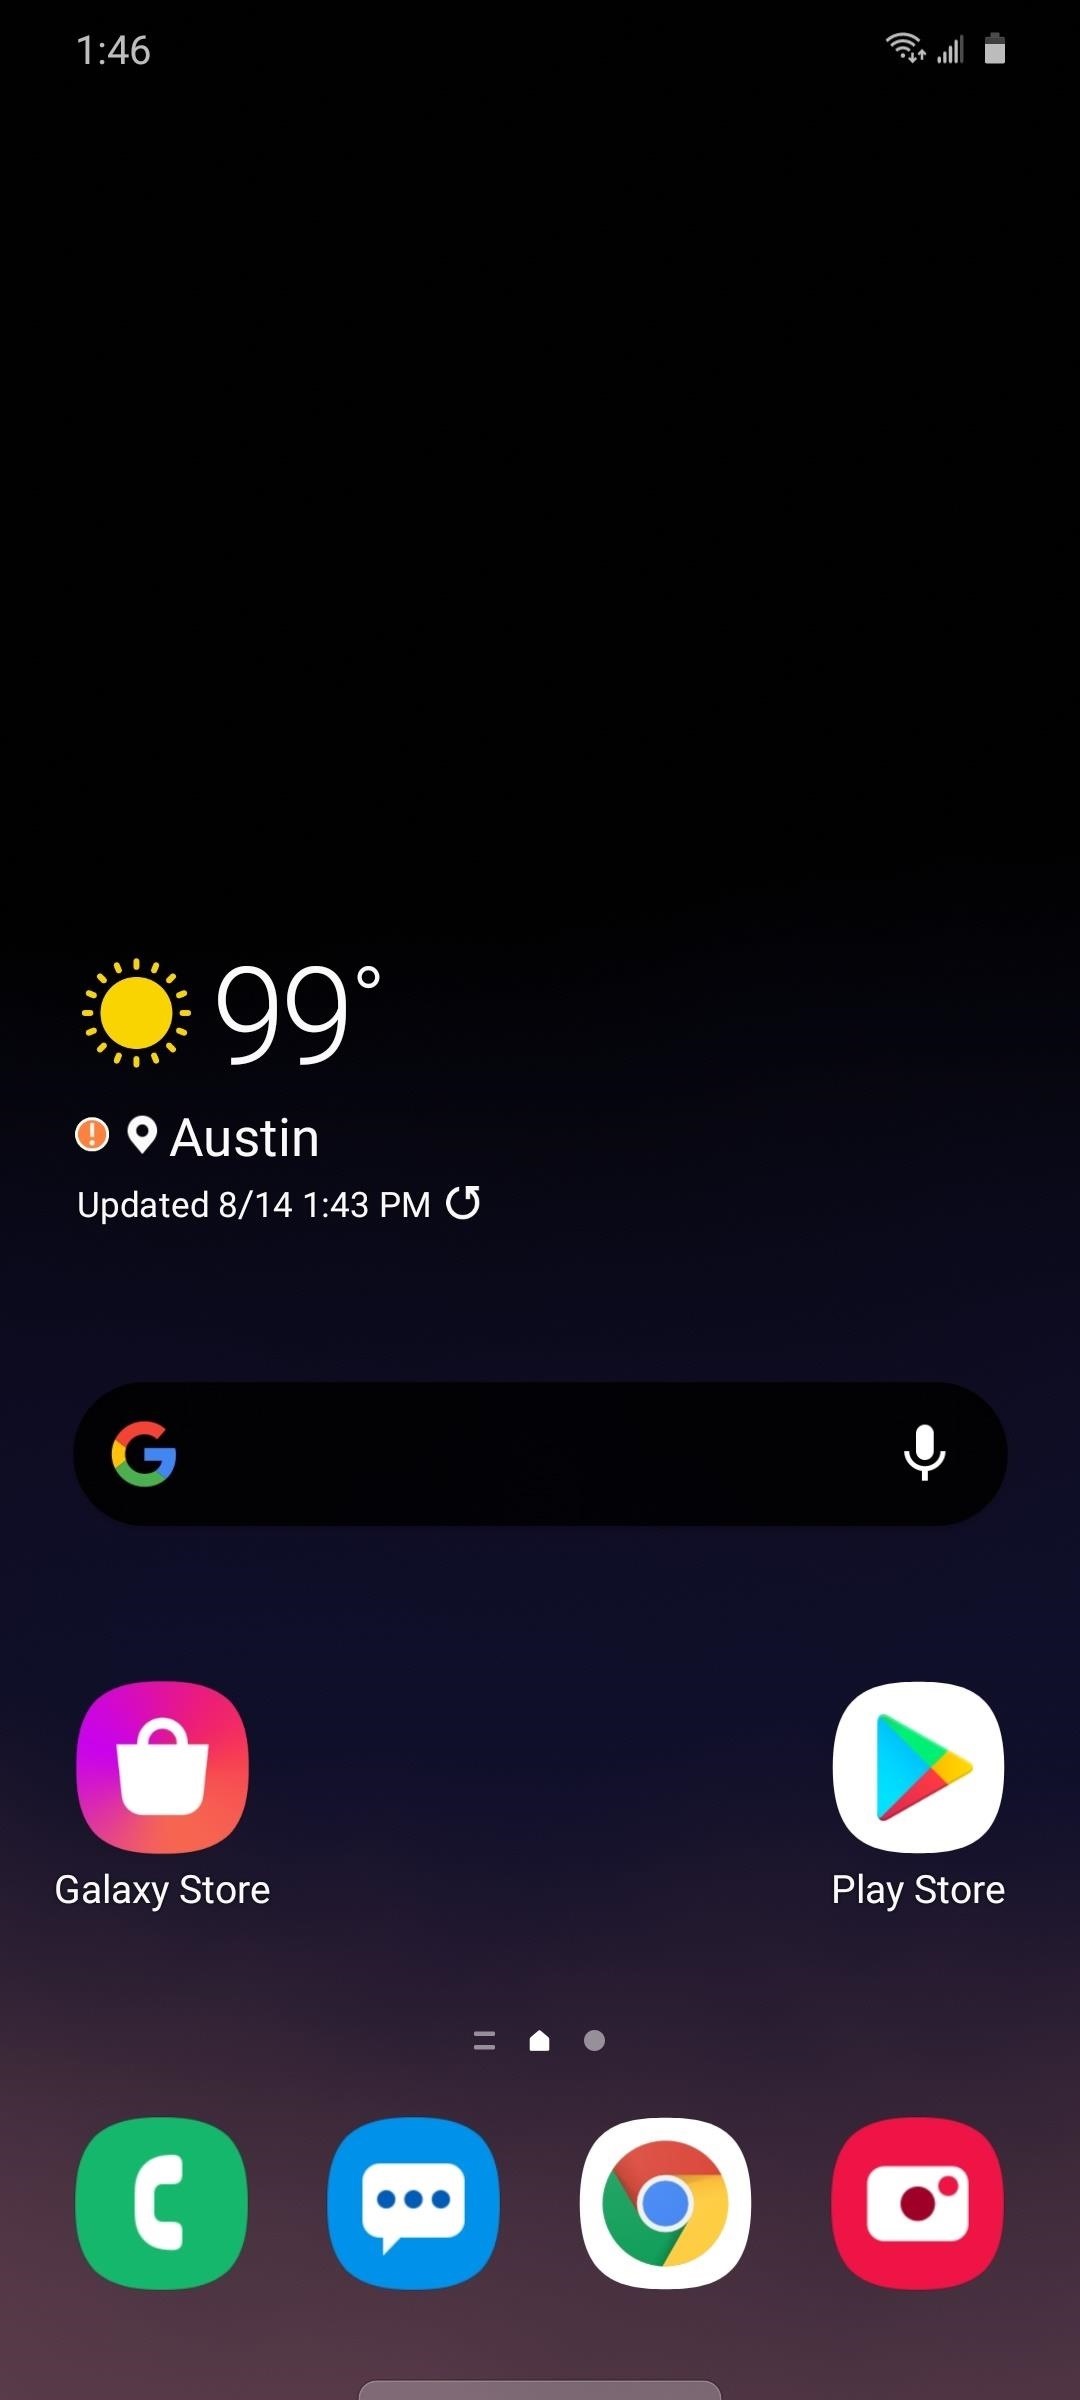 Get the Pixel 4a's New 'Eclipse' Live Wallpaper & Battery Meter on Any Android